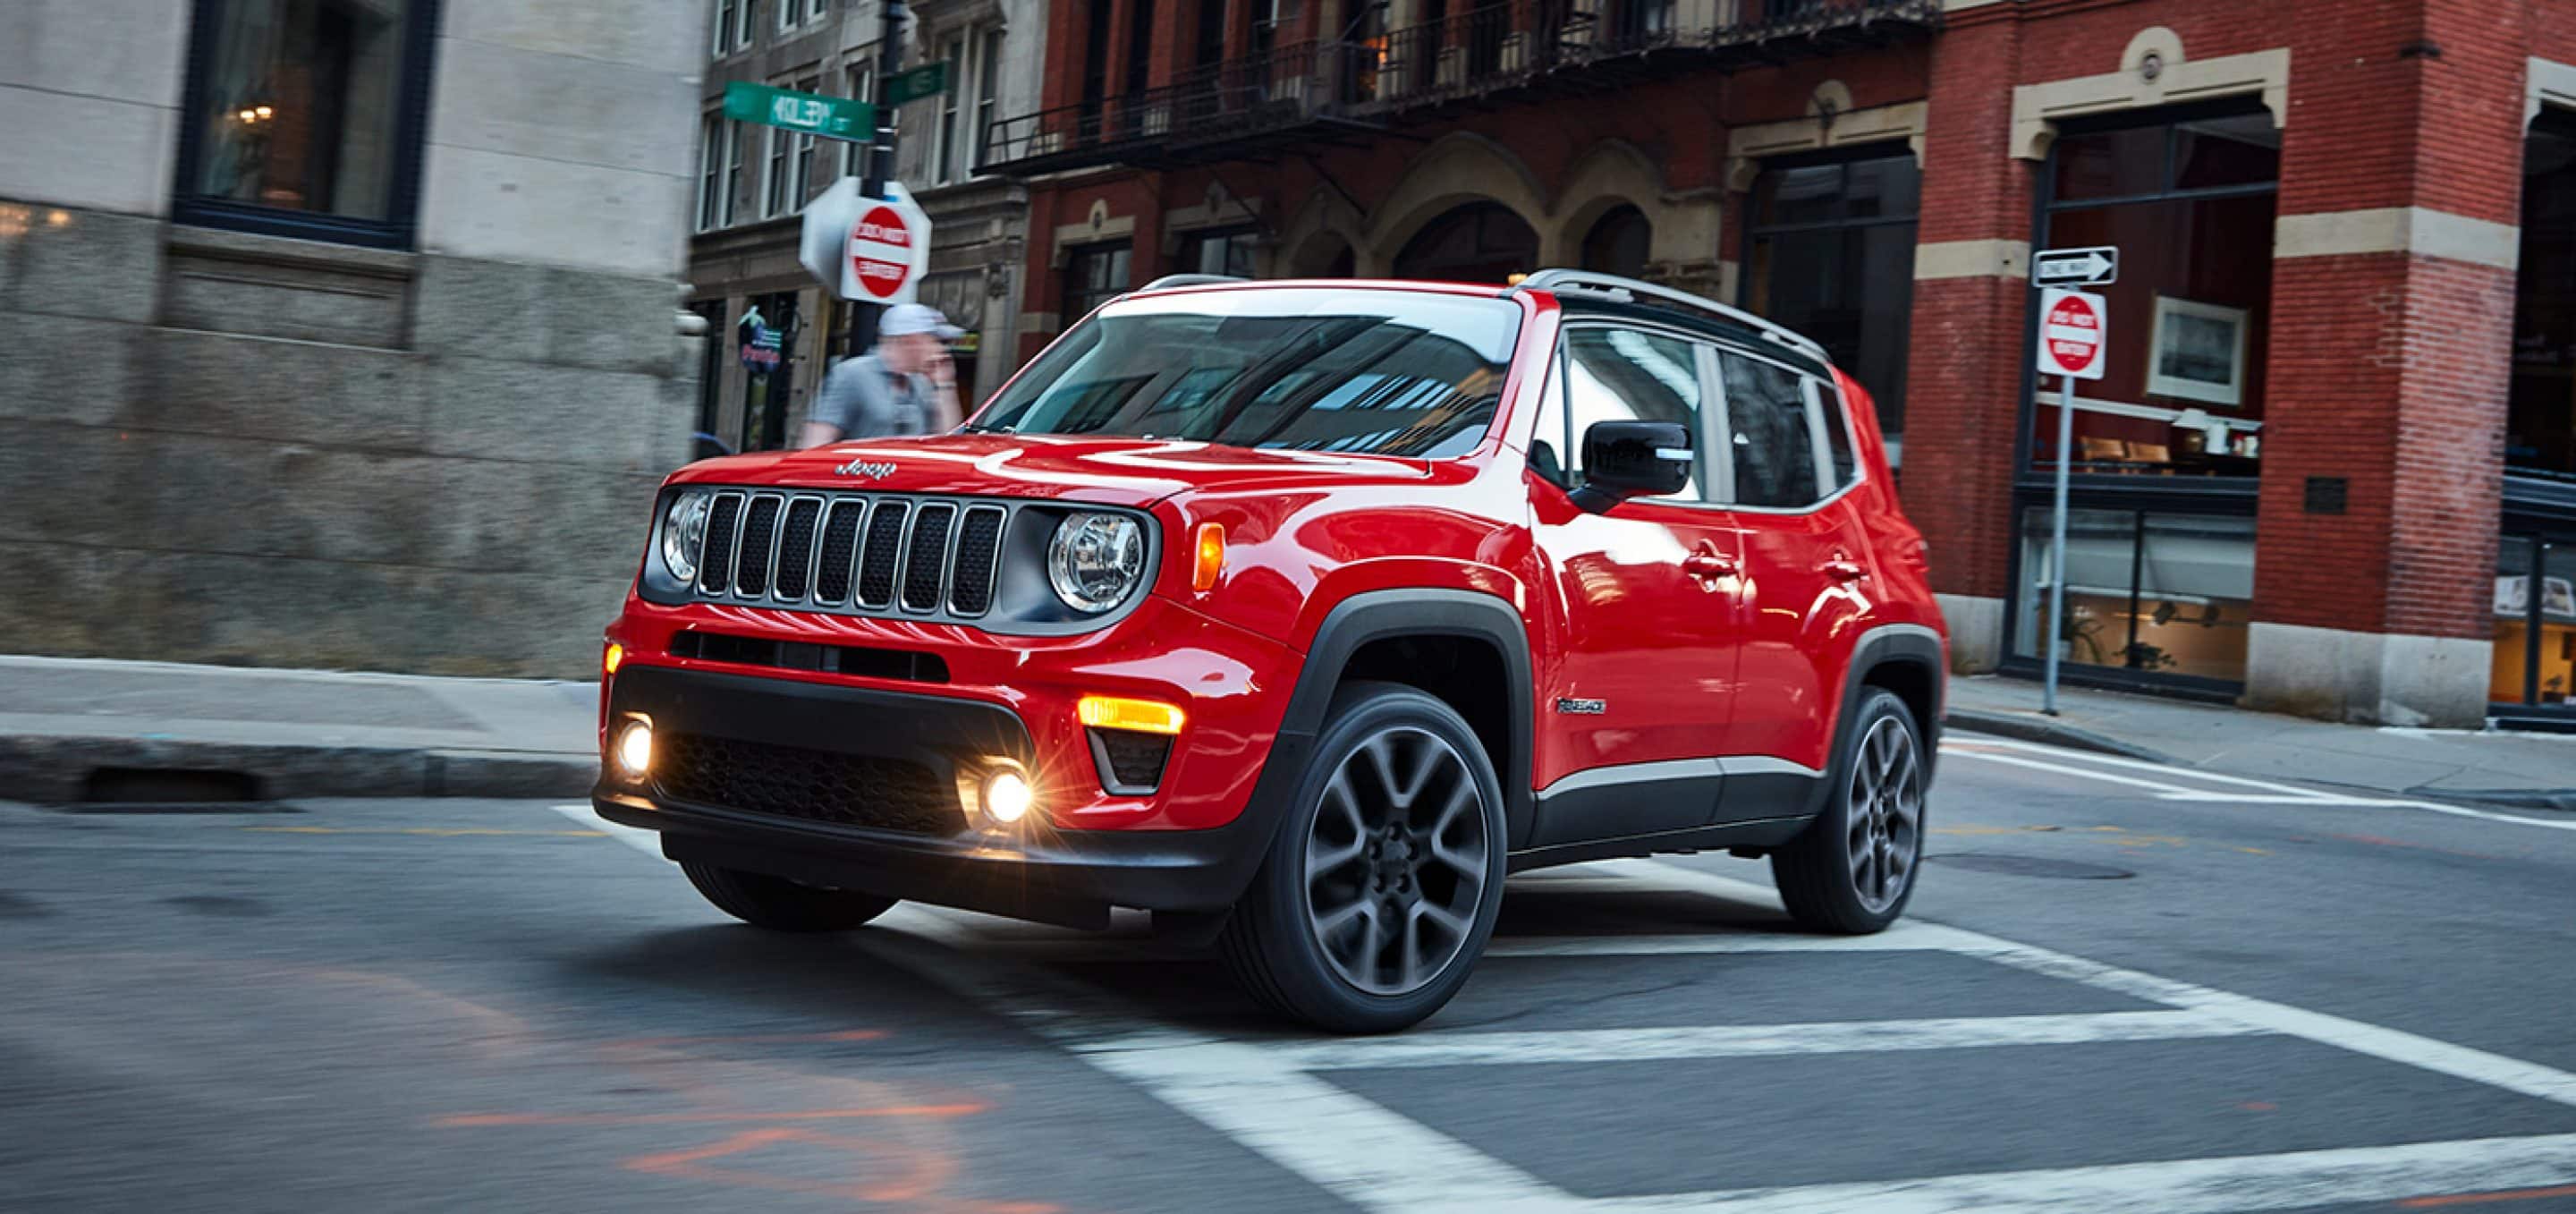 2022 Jeep Renegade For Sale in Marshfield, MO